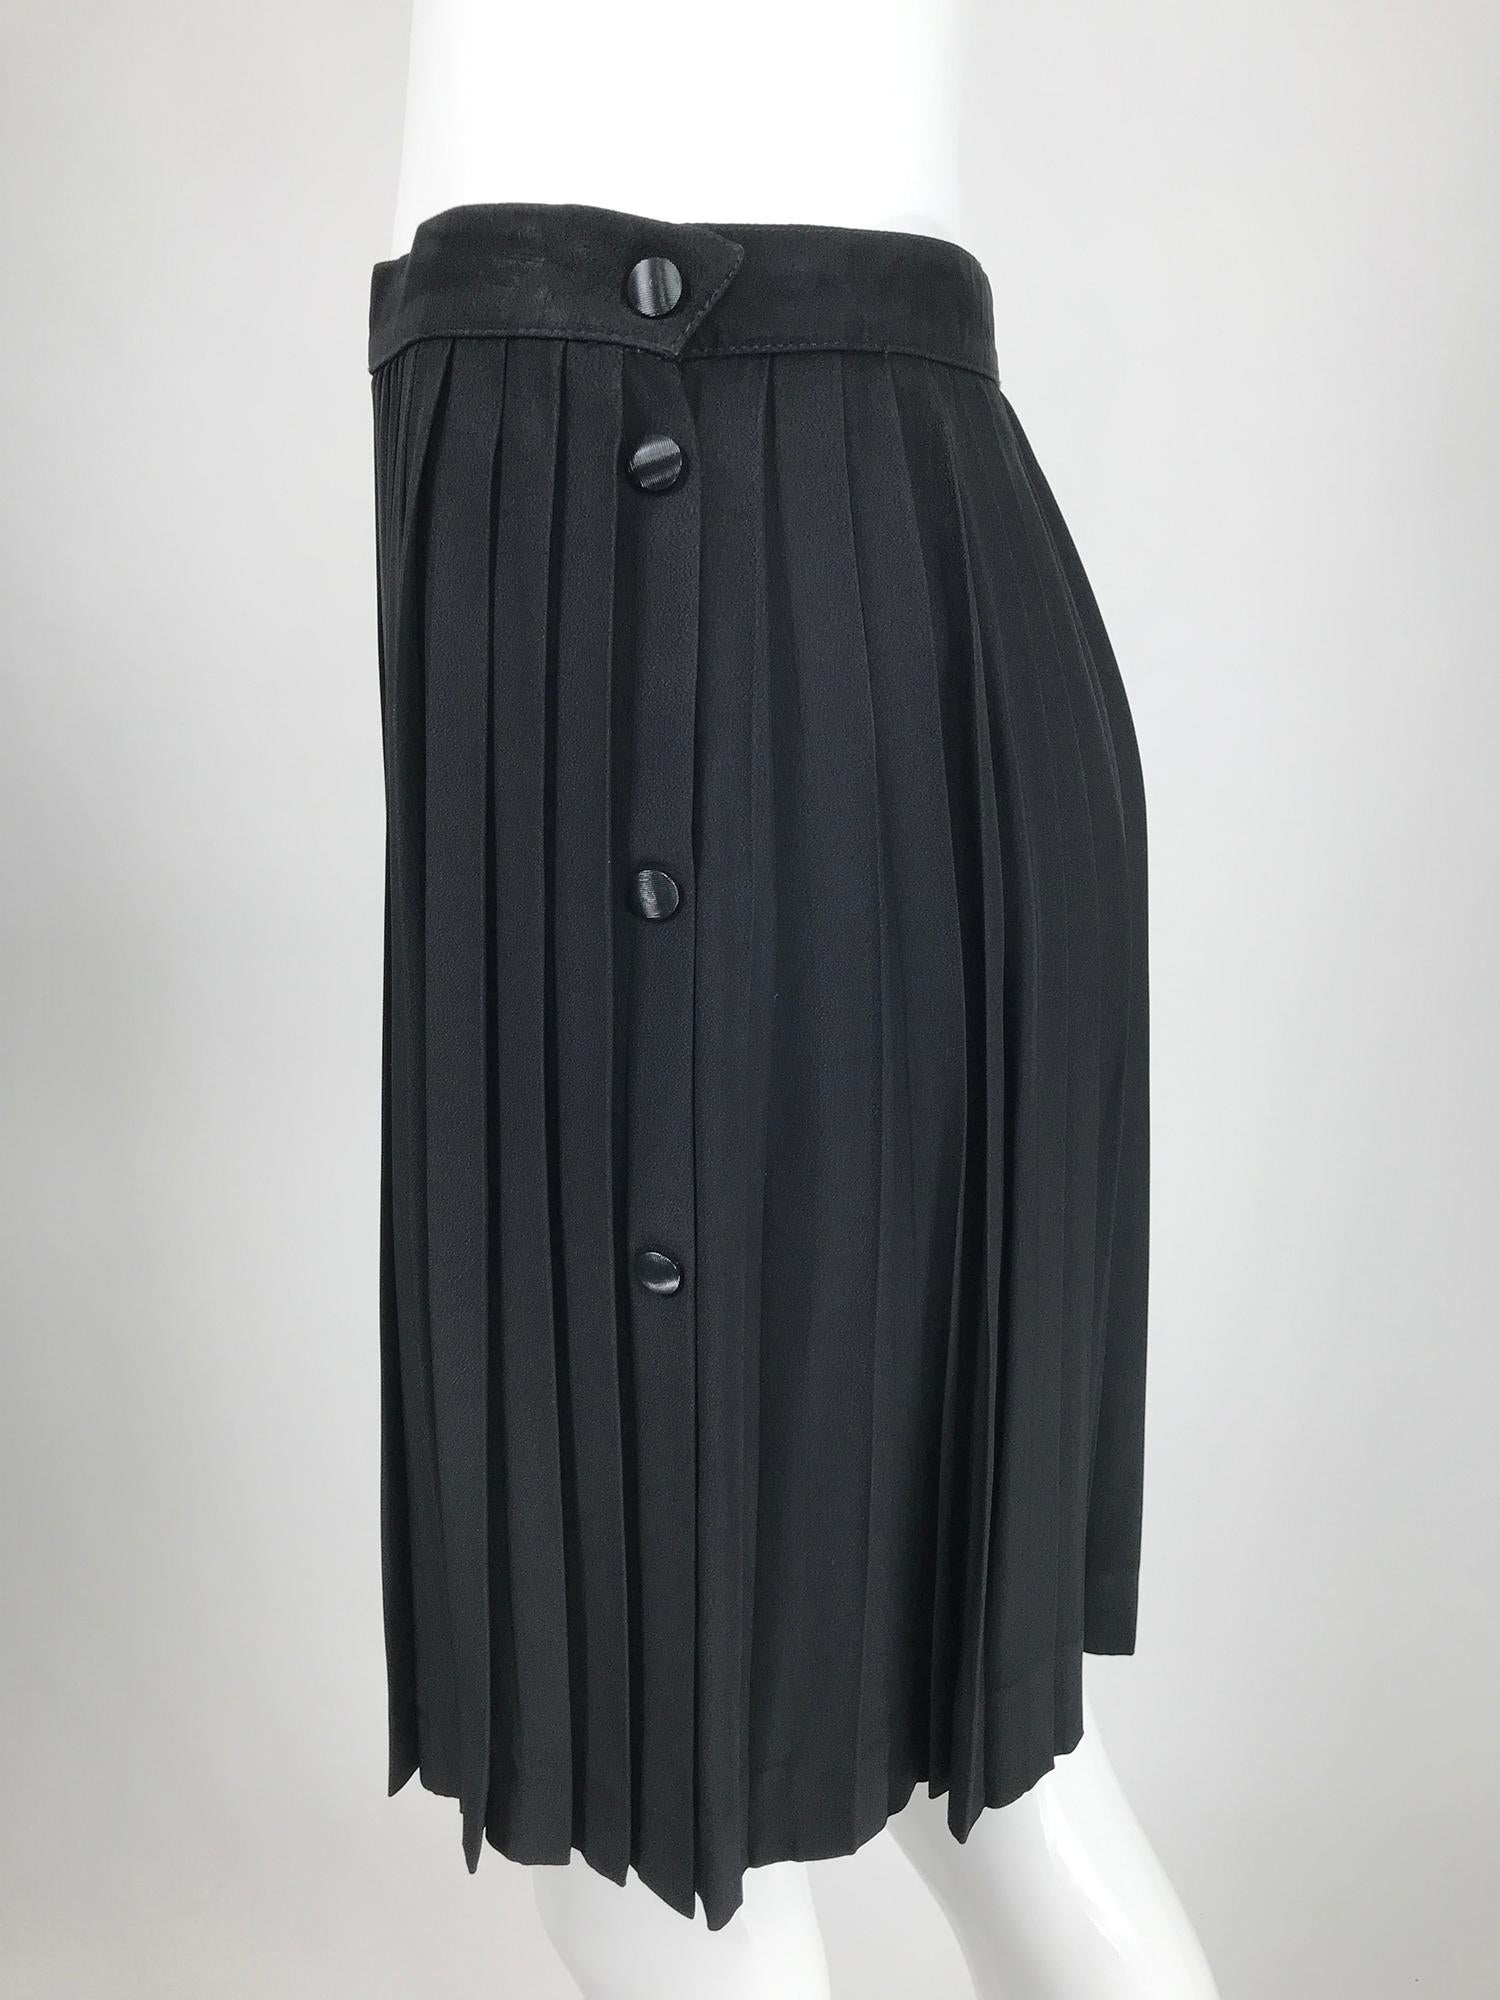 Thierry Mugler Black Crepe Side Snap Pleated Mini Skirt 1980s For Sale 2